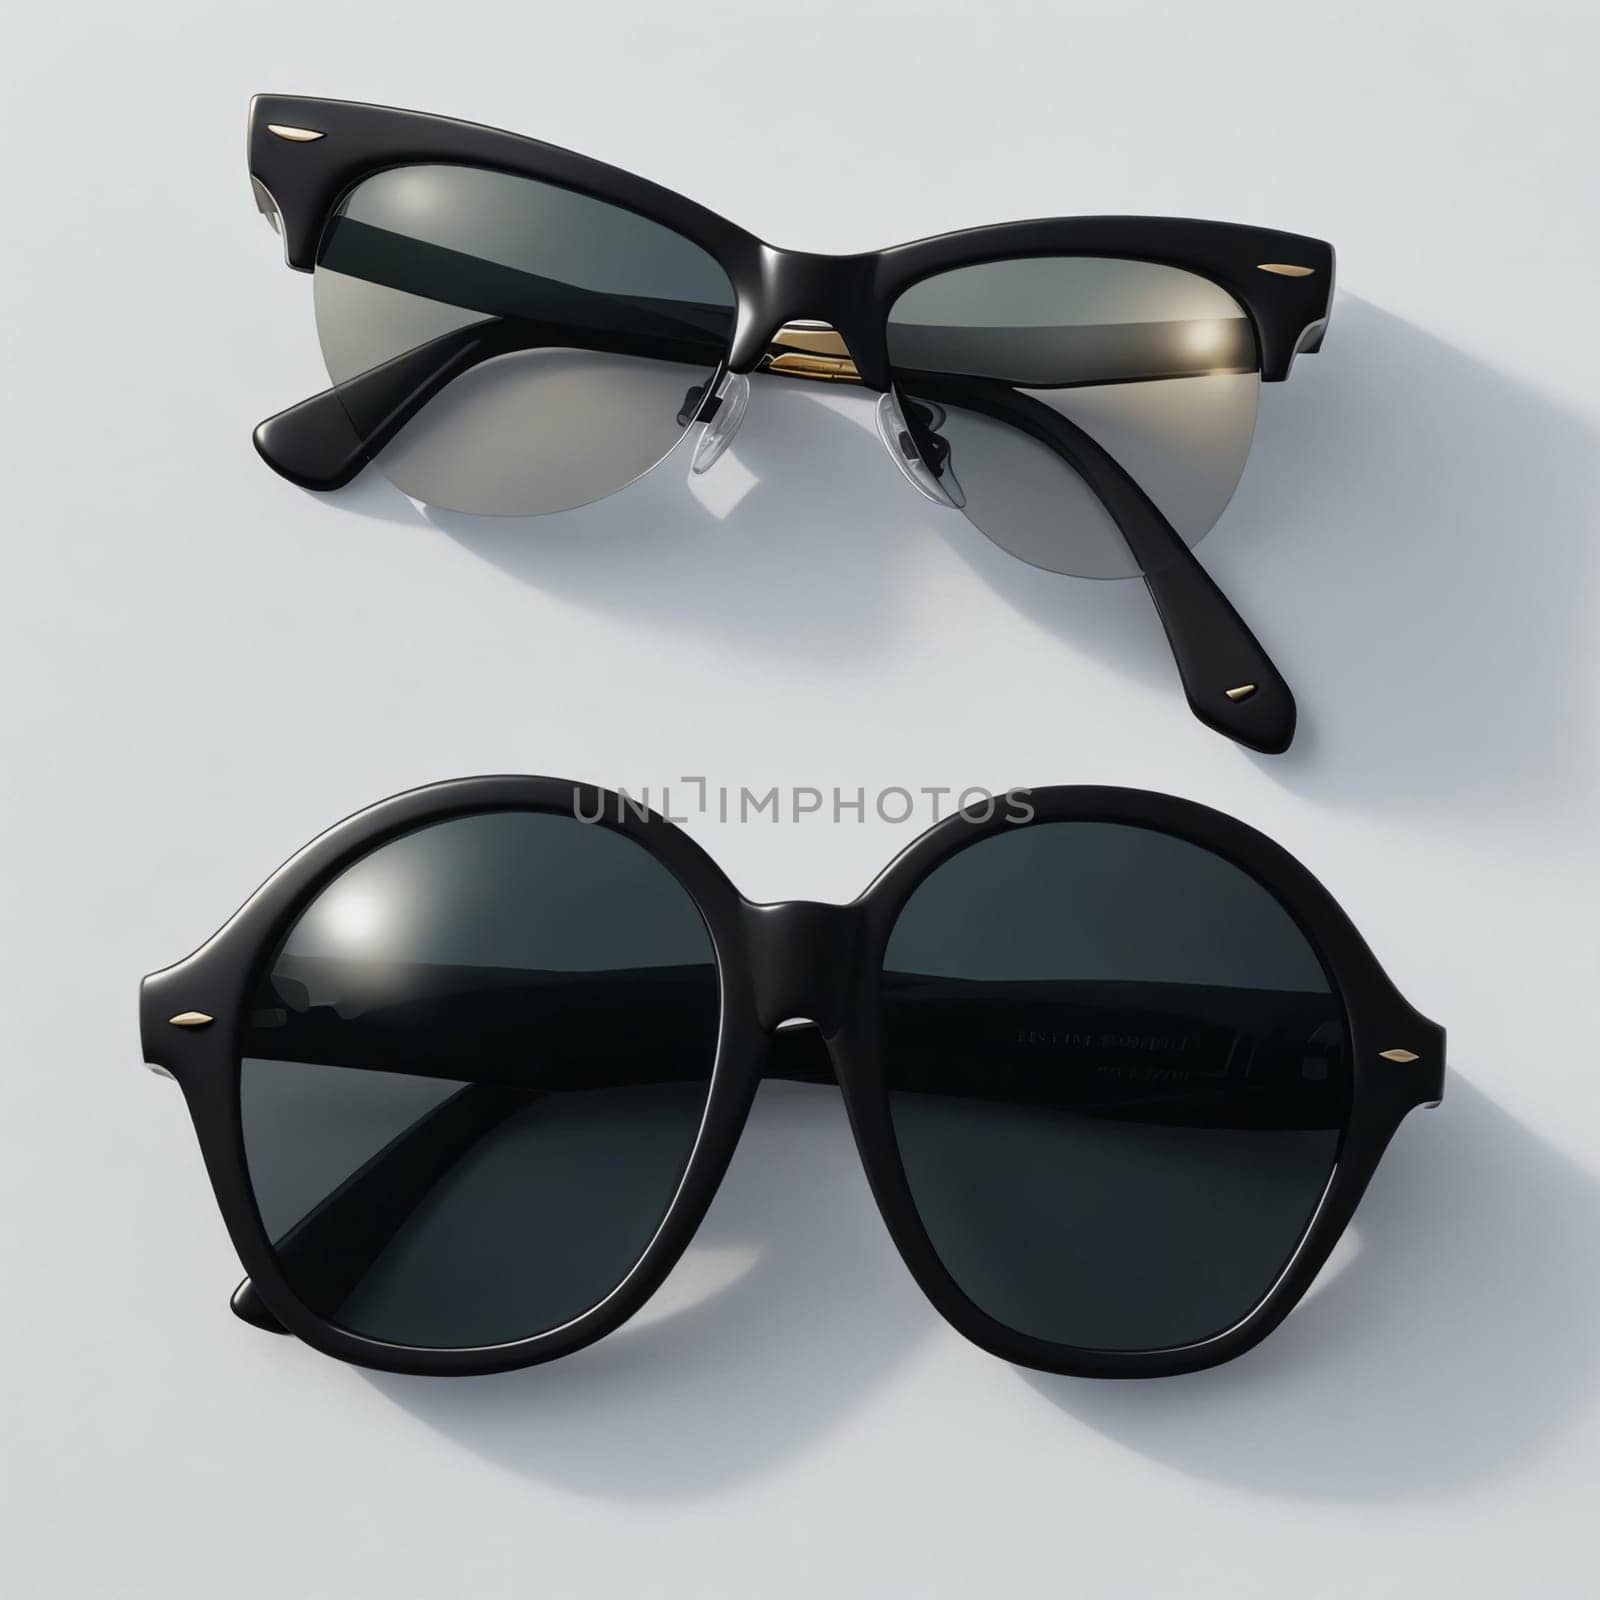 black sunglasses on a white background illuminated by the sun